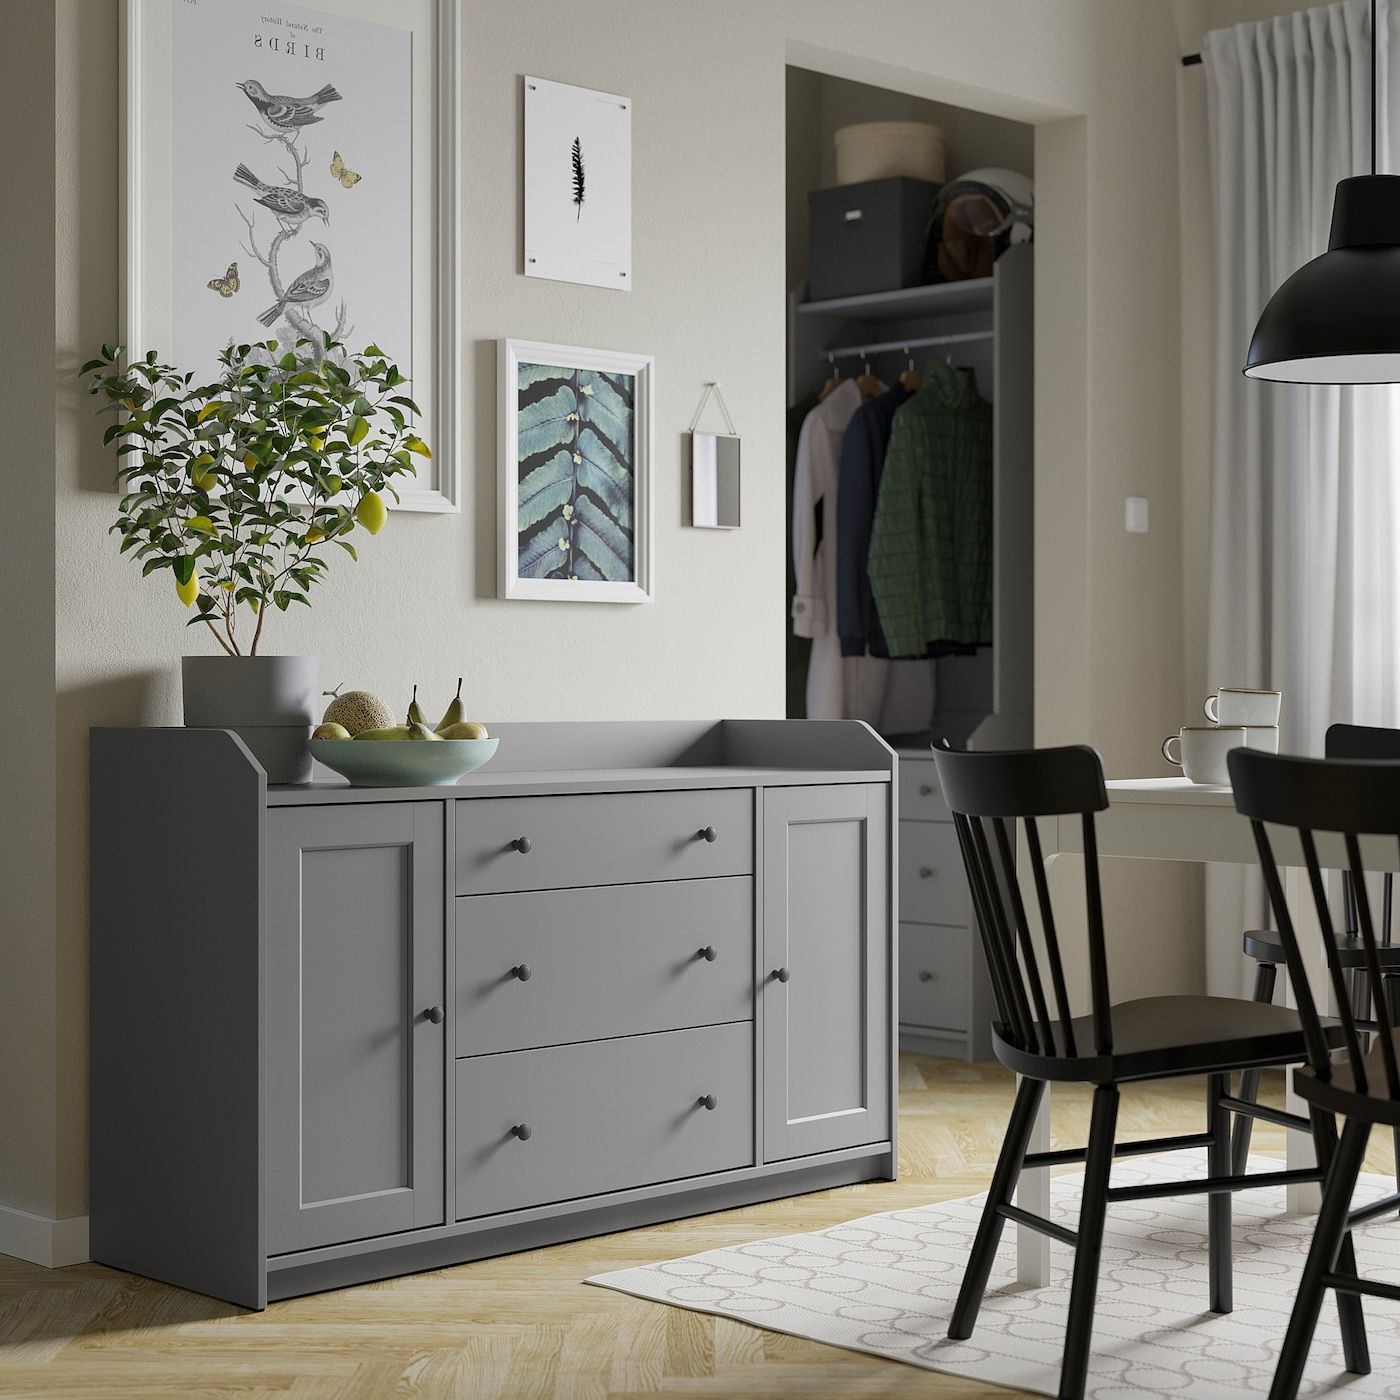 Hauga Sideboard, Gray, 140x84 Cm (551/8x331/8") – Ikea Ca Intended For Gray Wooden Sideboards (View 6 of 20)